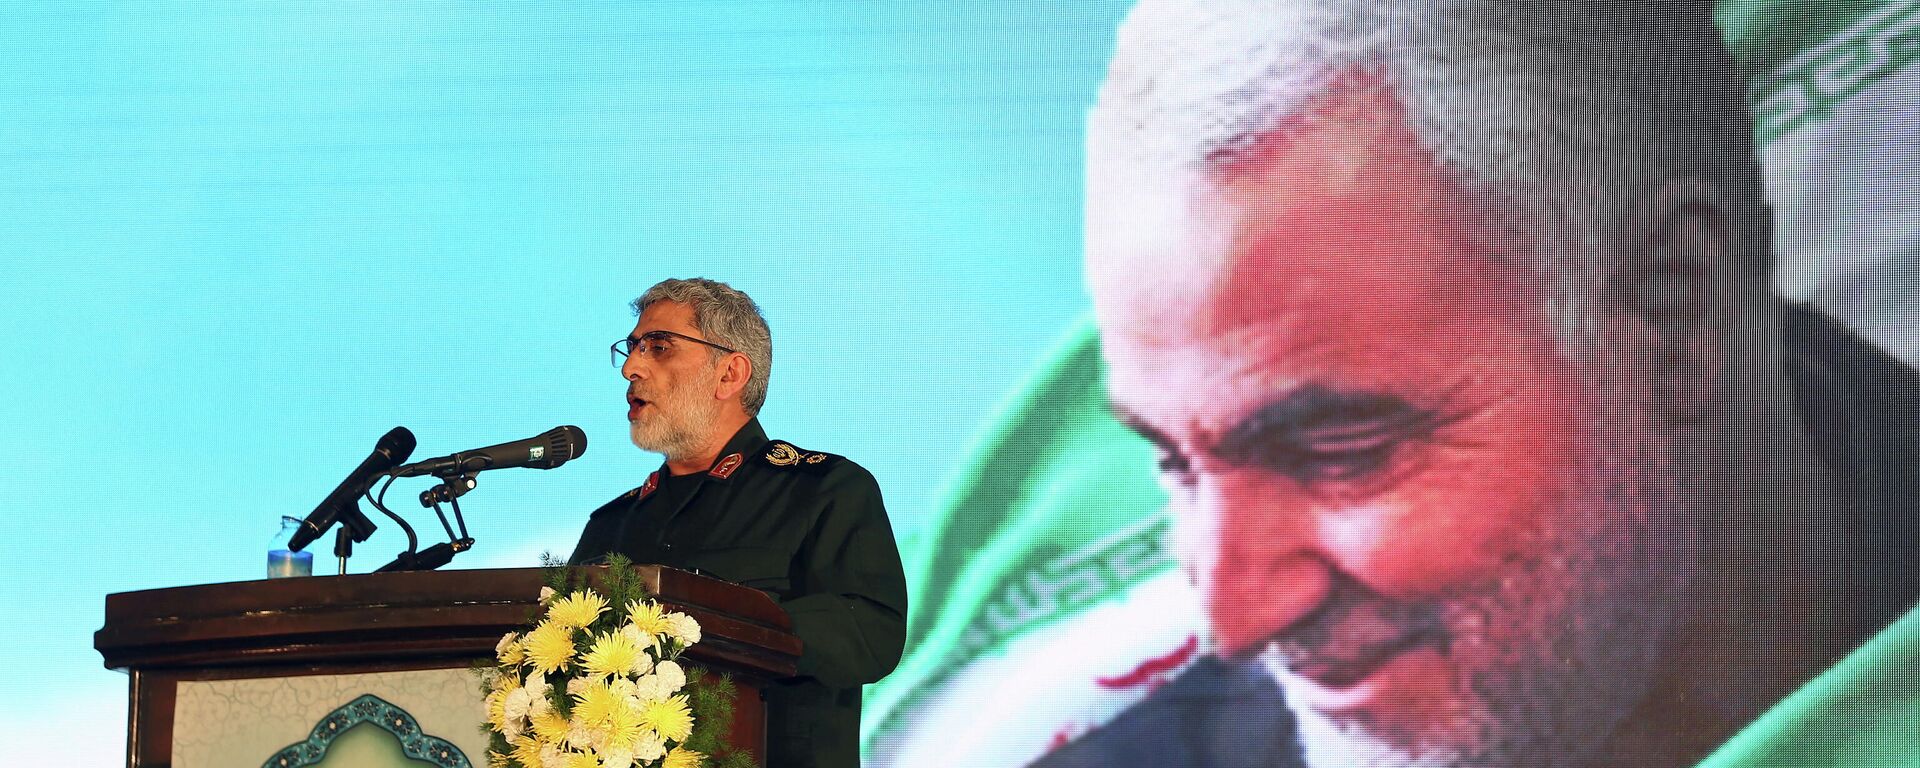 Brigadier General Esmail Ghaani, the newly appointed commander of Iran's Quds Force, reads the will of Major General Qassem Soleimani, who was killed in a U.S. air strike at Baghdad Airport, during the forty day memorial at the Grand Mosalla in Tehran, Iran February 13, 2020 - Sputnik International, 1920, 09.01.2022